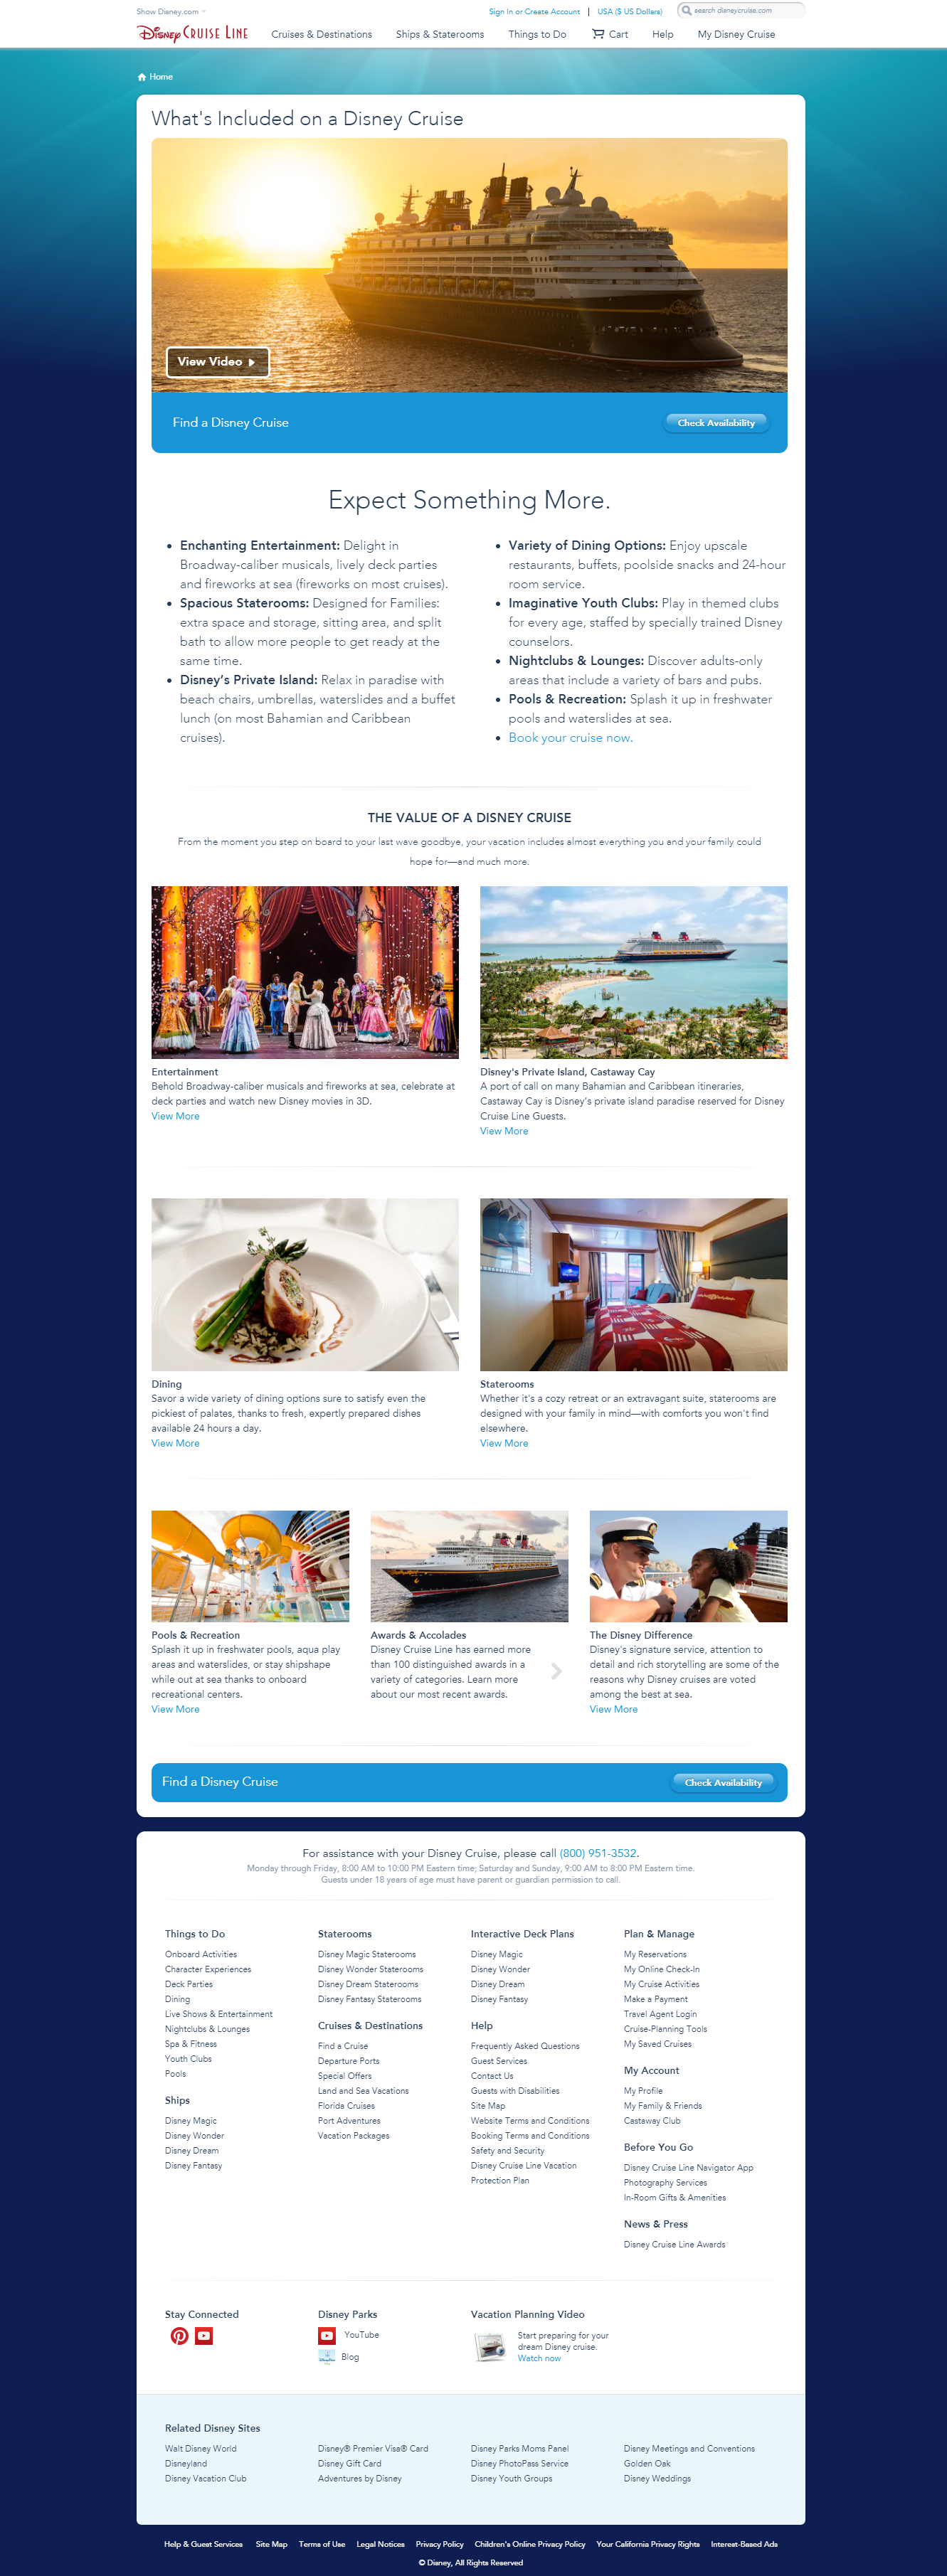 disneycruise-disney-go-featured-whats-included-in-cruise-2016